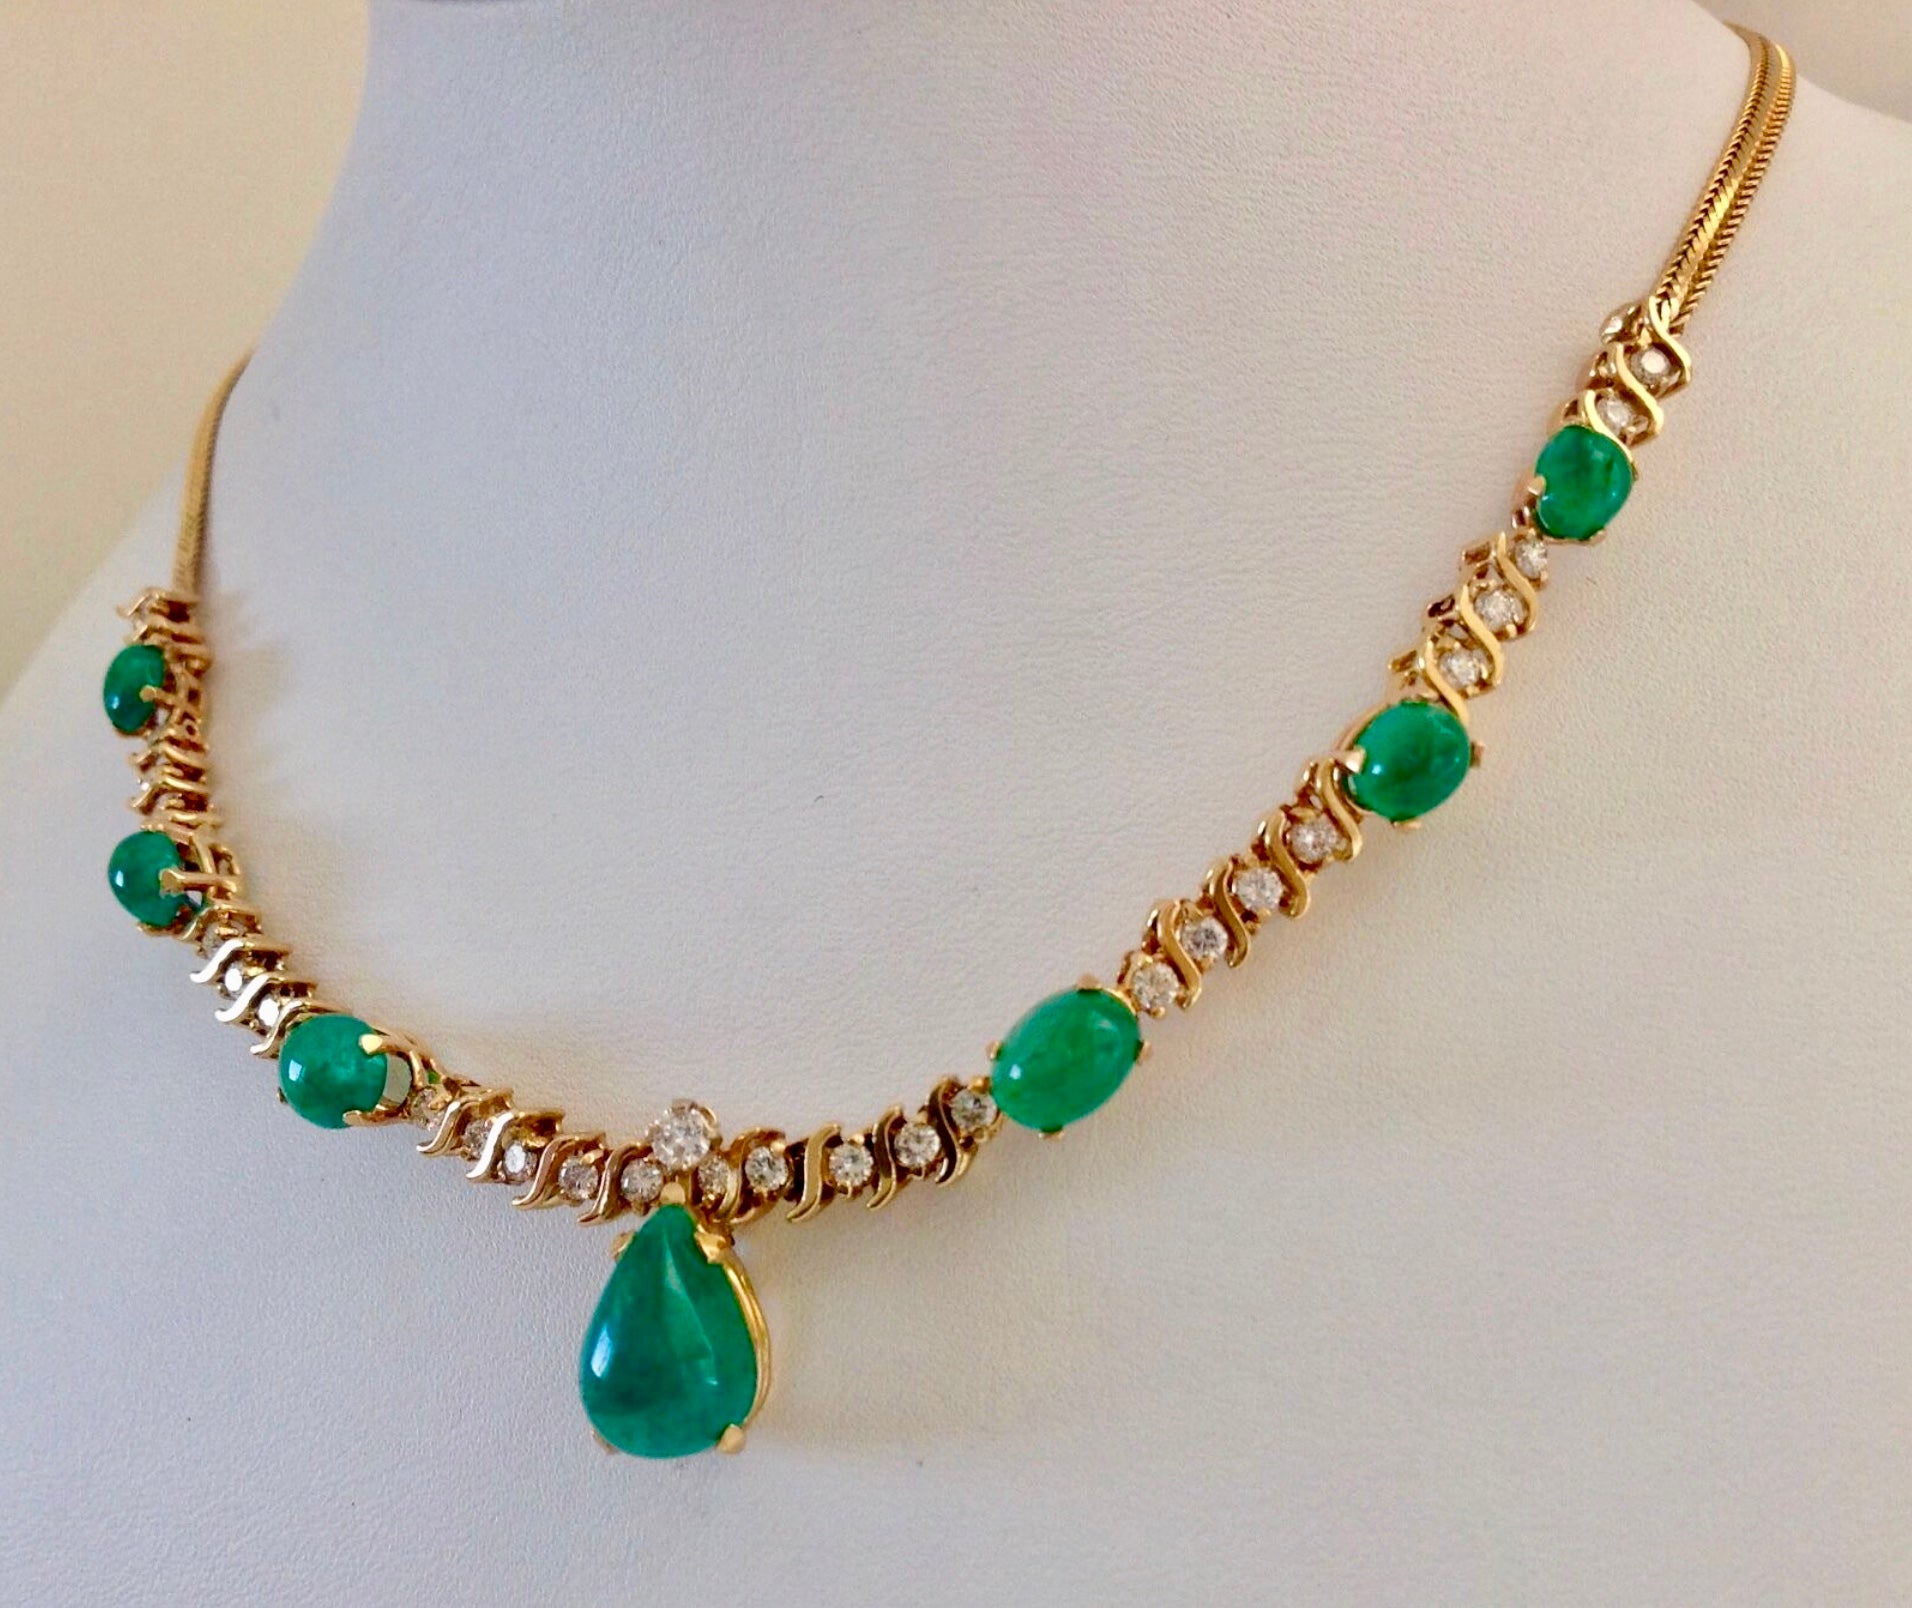 Suite Colombian Emerald Diamond Necklace and Earrings